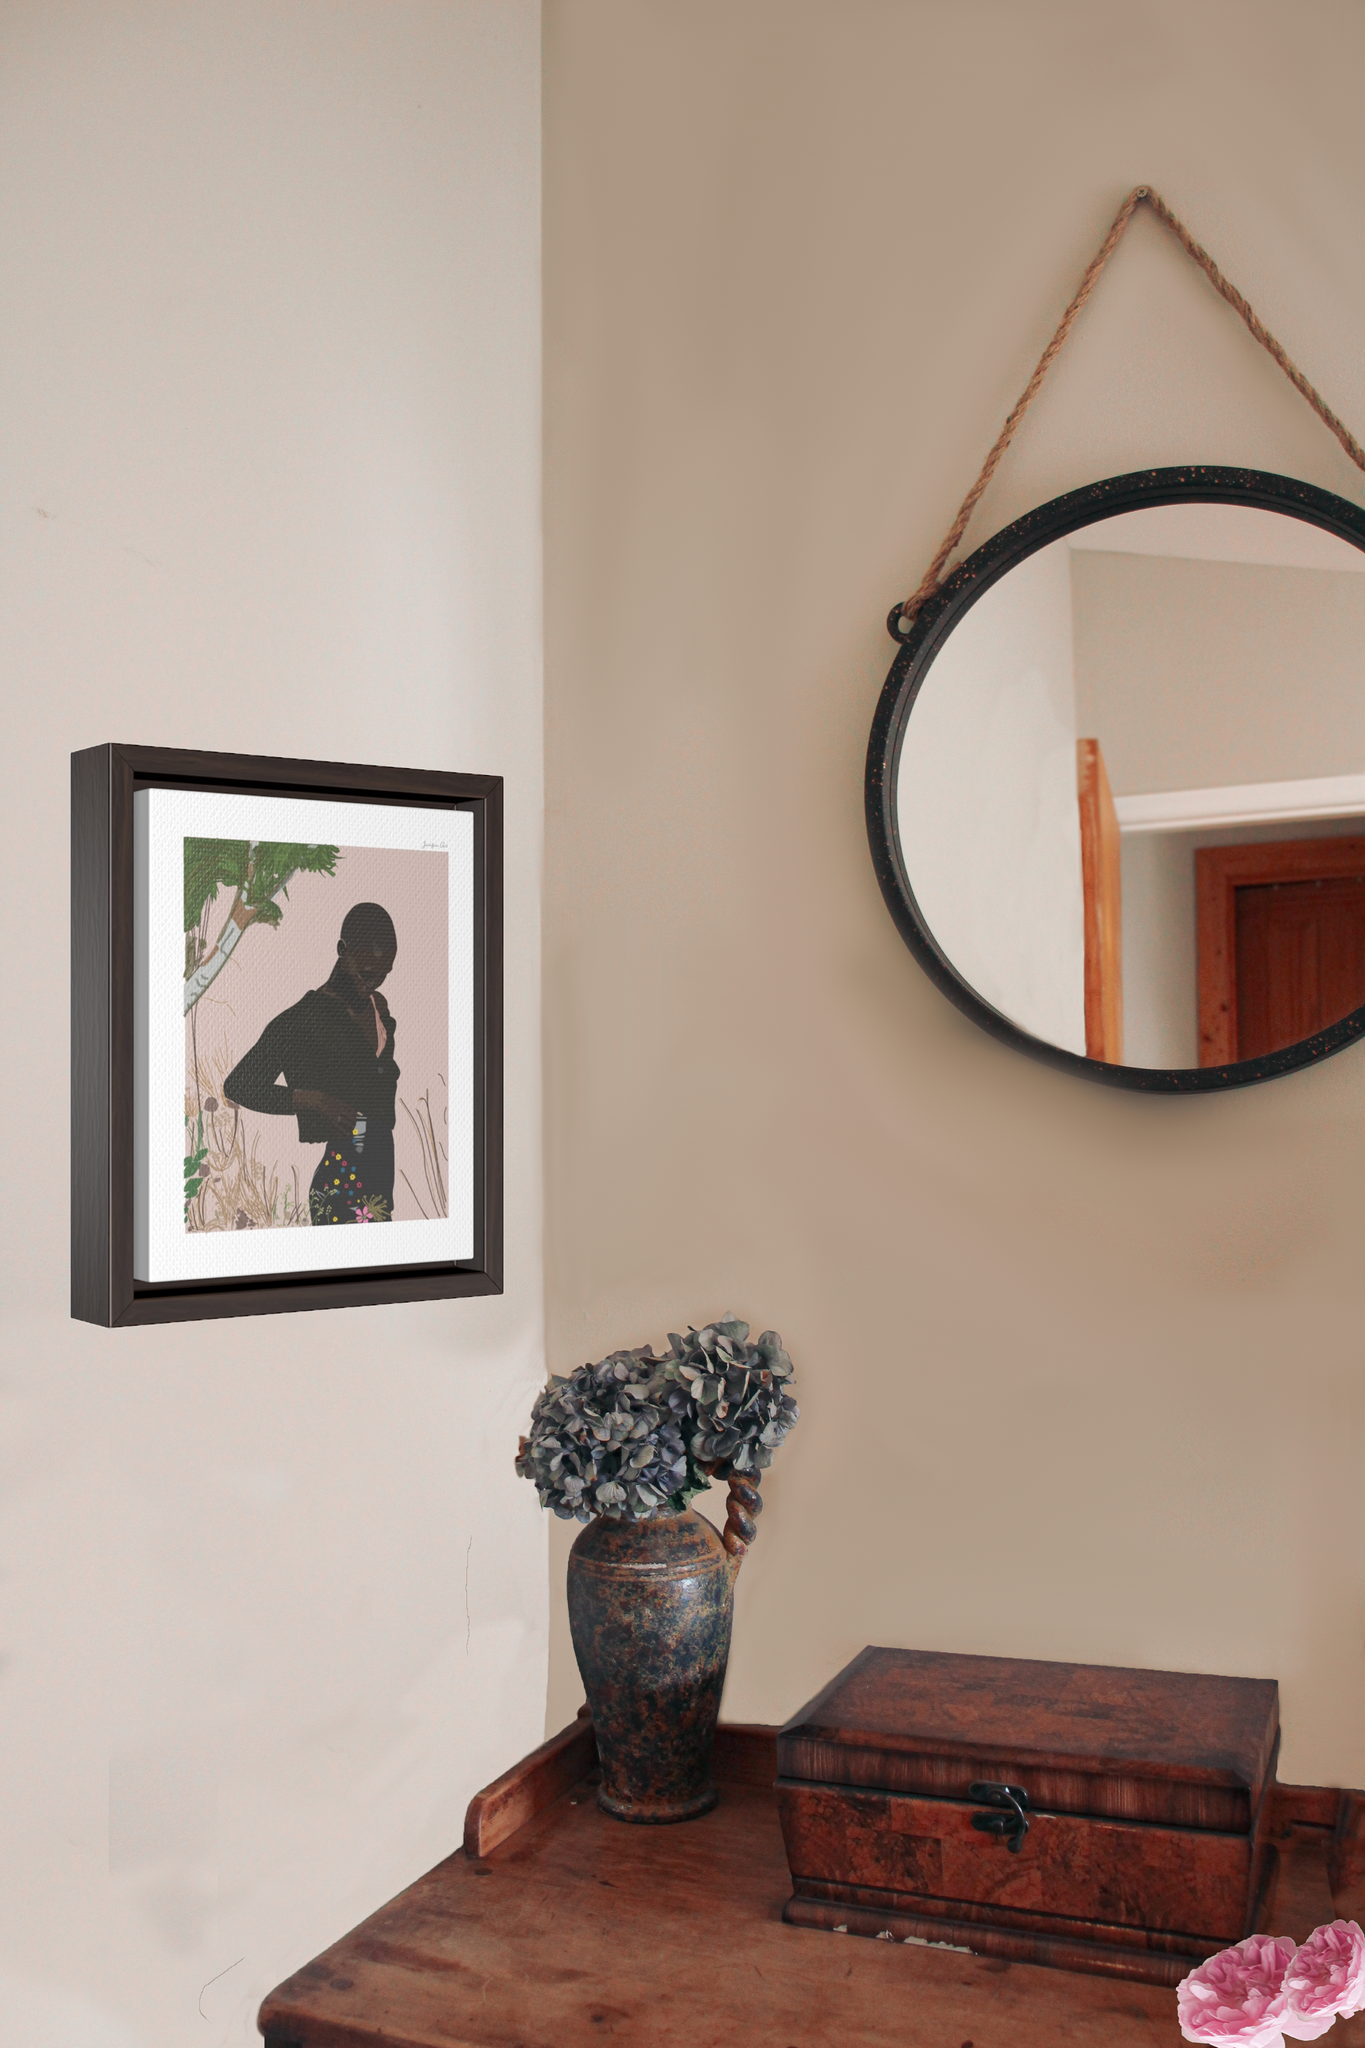 A framed canvas illustration of Black model Amar Akway posing in a garden in a Miu Miu outfit, hanging on a wall next to a wood desk and a hanging circle mirror